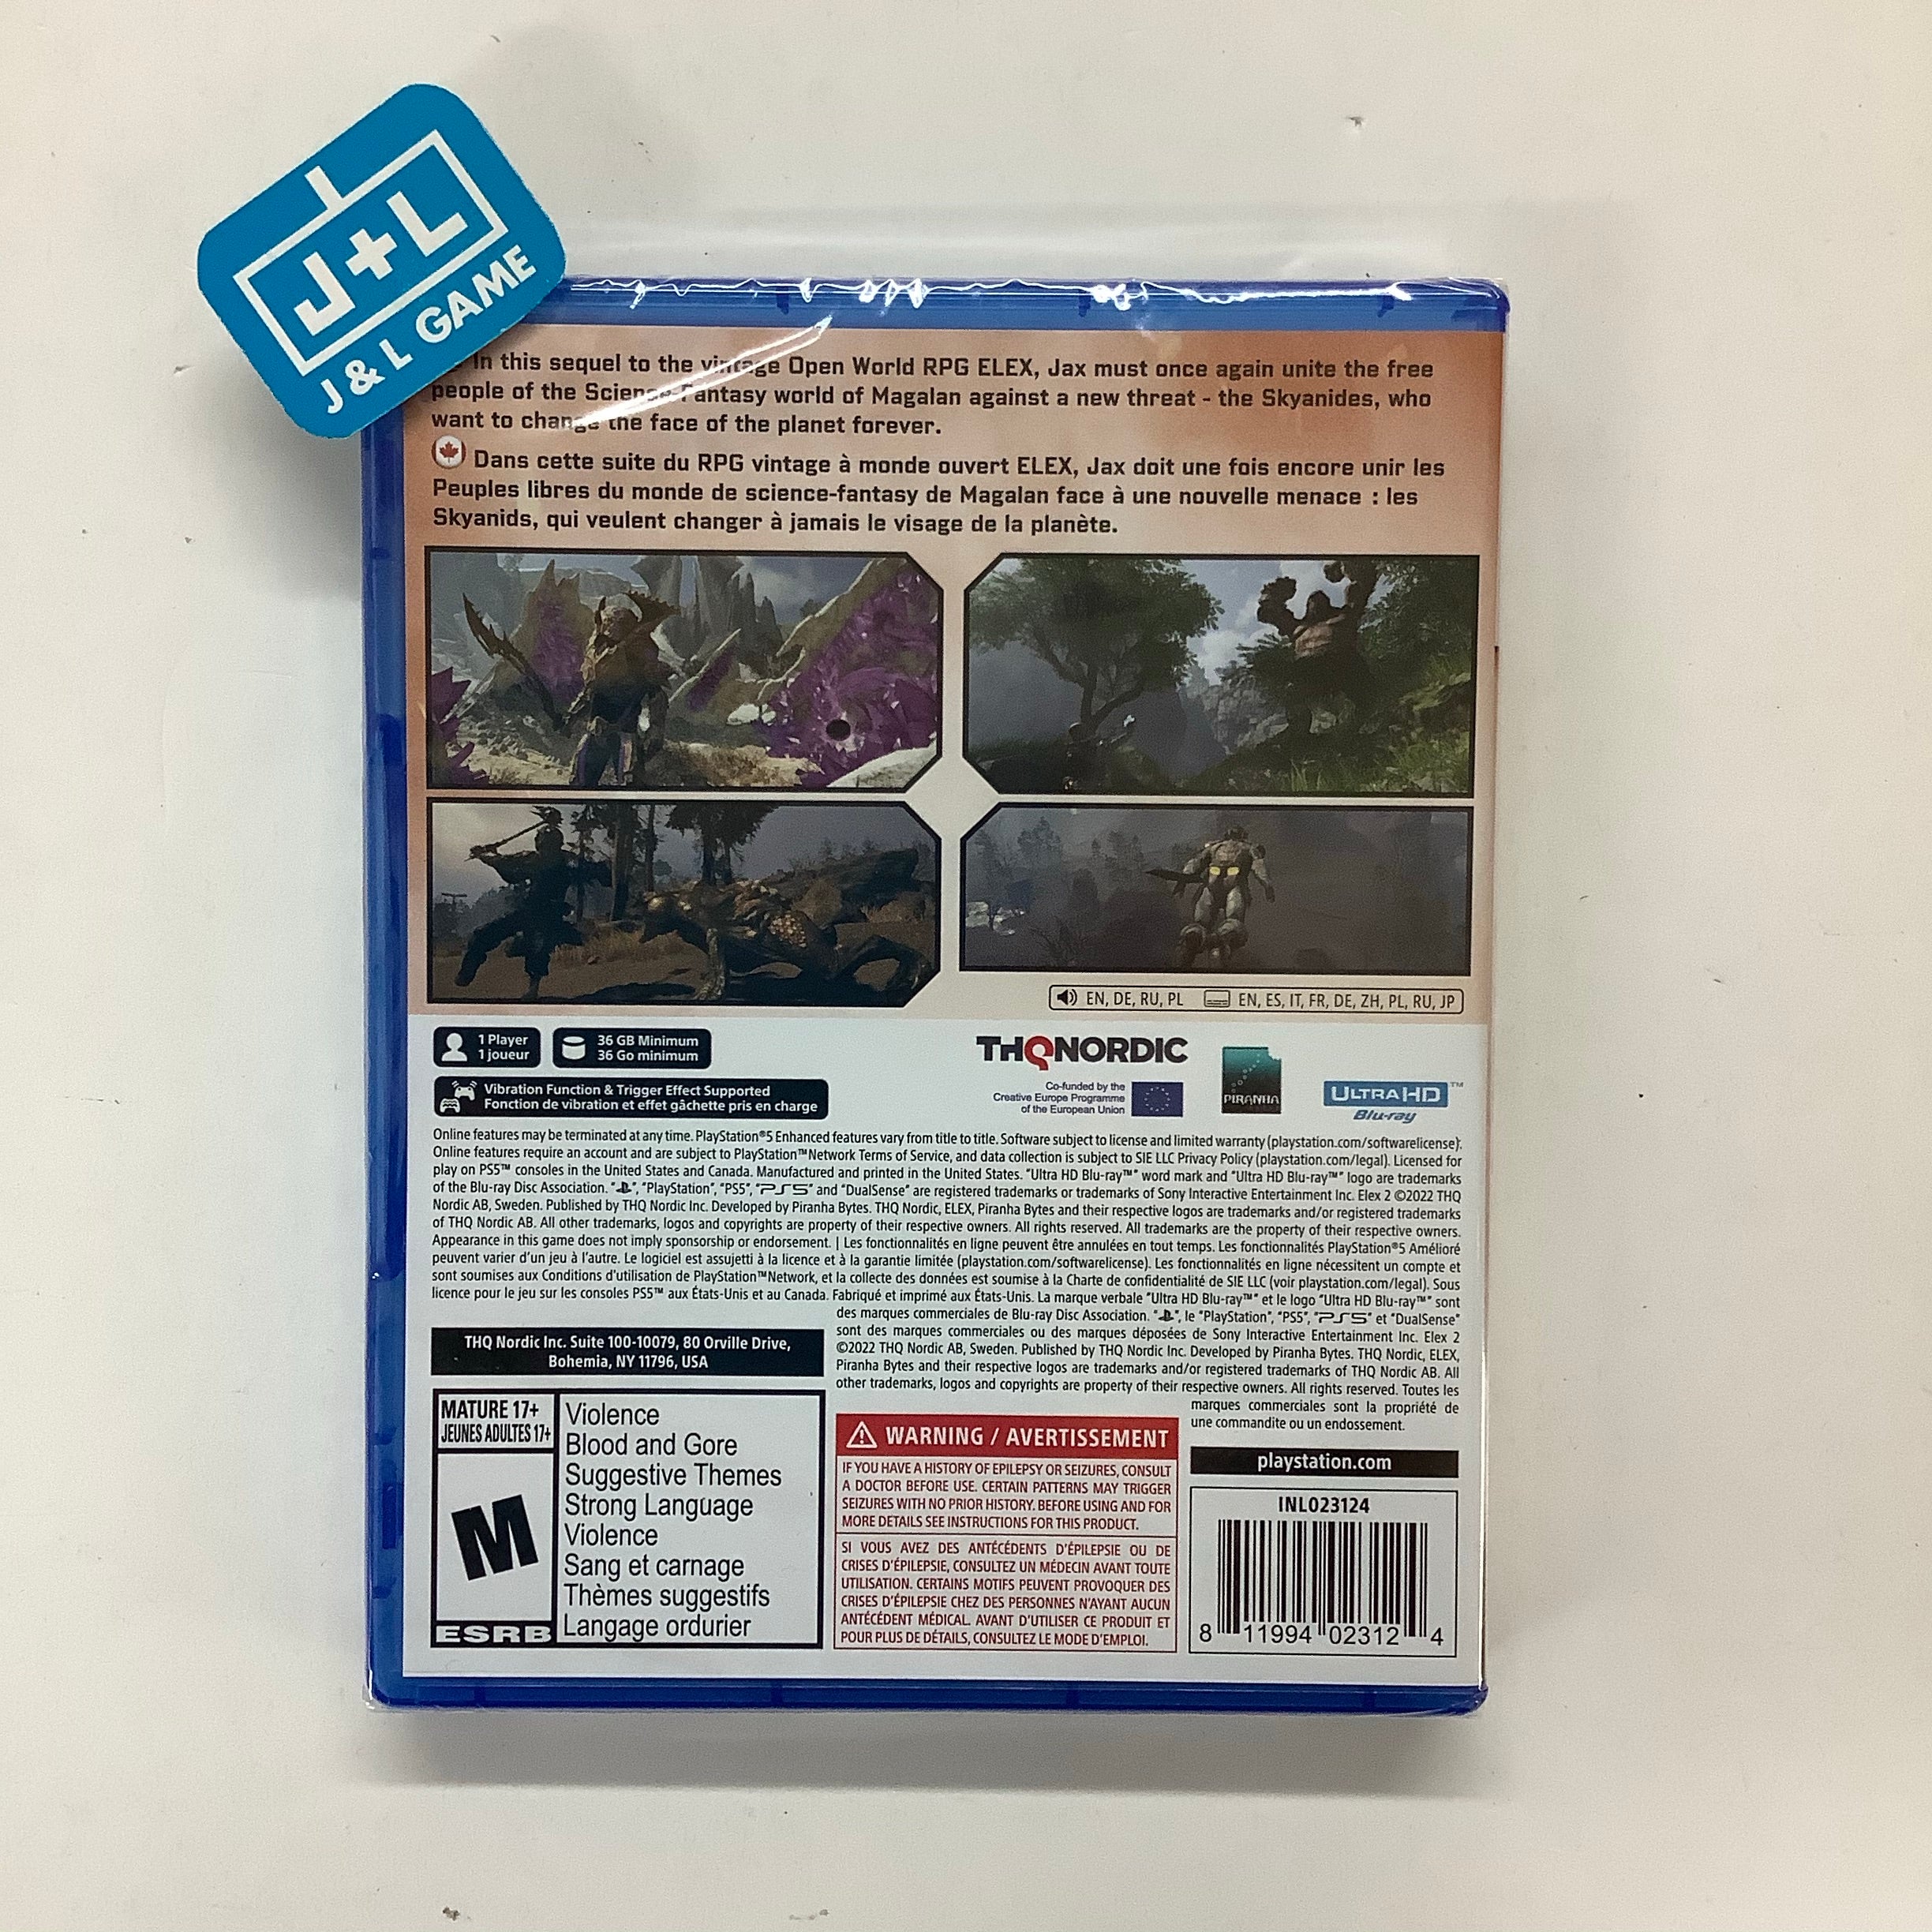 Elex II - (PS5) PlayStation 5 Video Games THQ Nordic   